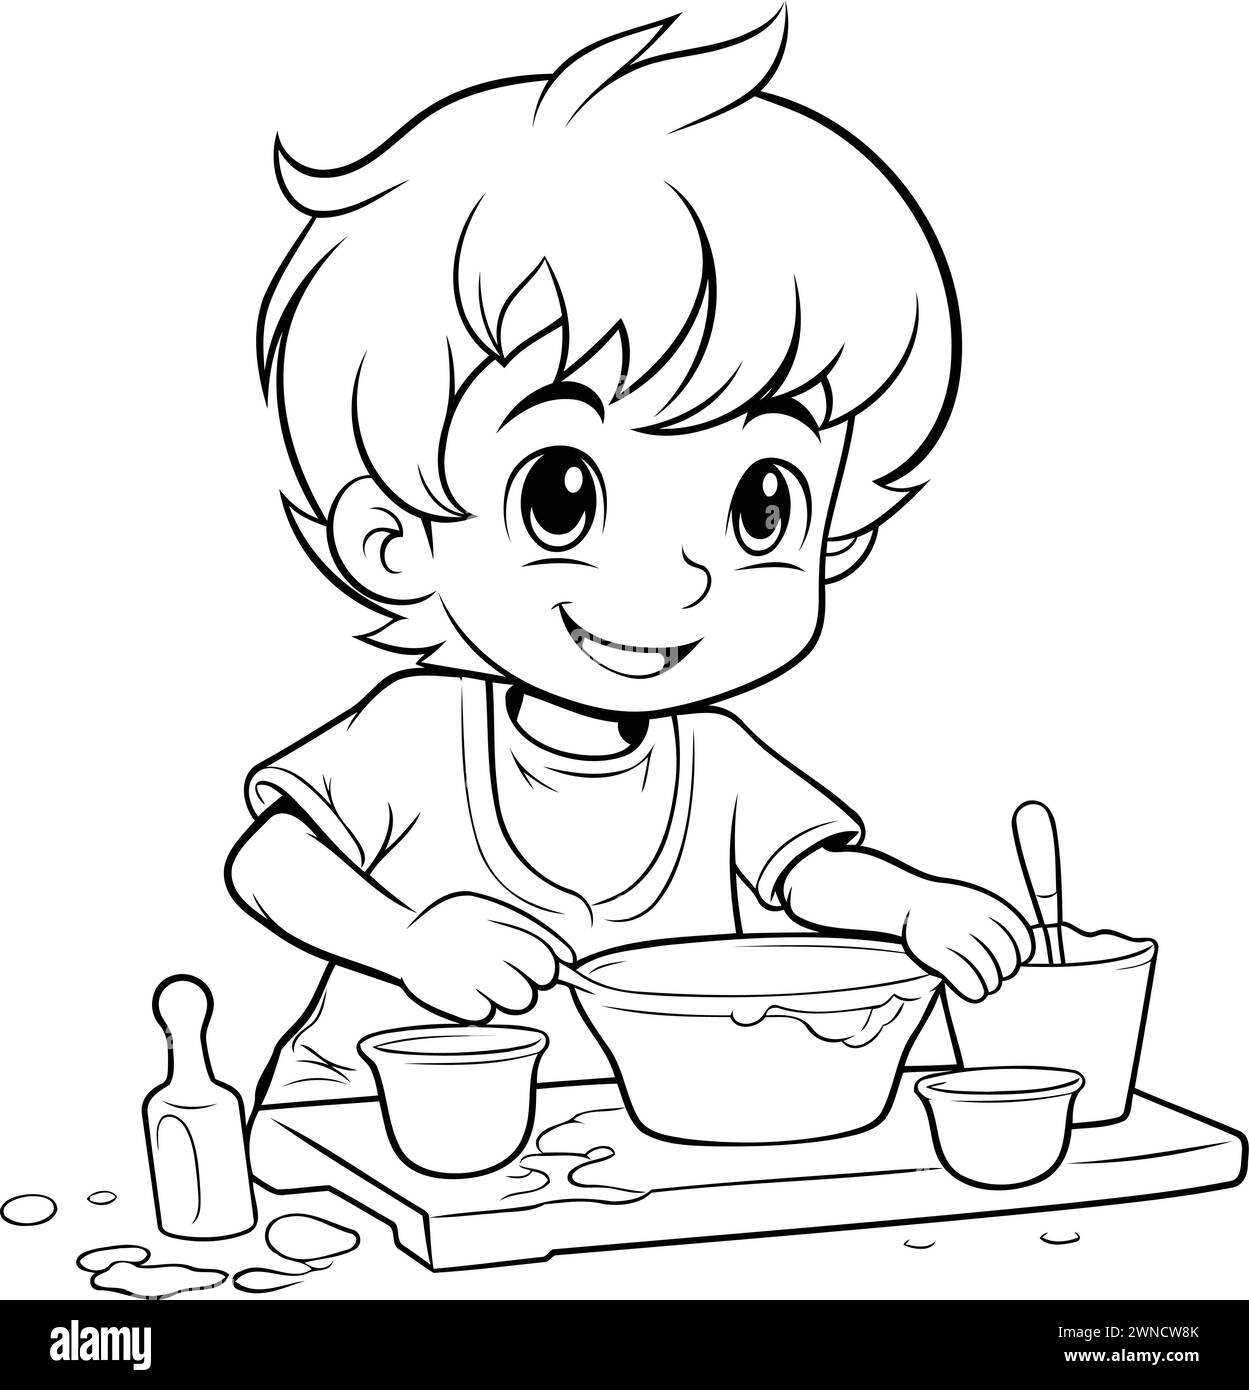 Illustration of a Cute Little Boy Mixing Food in a Bowl Stock Vector